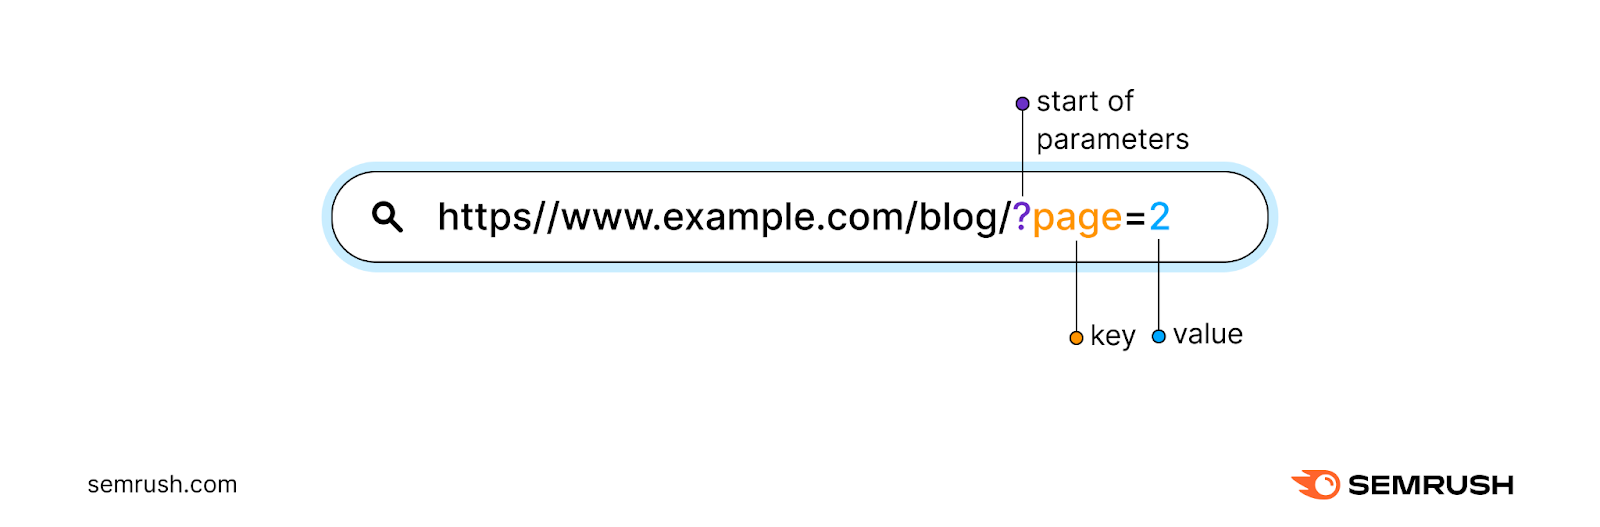 Query parameters shown in an URL